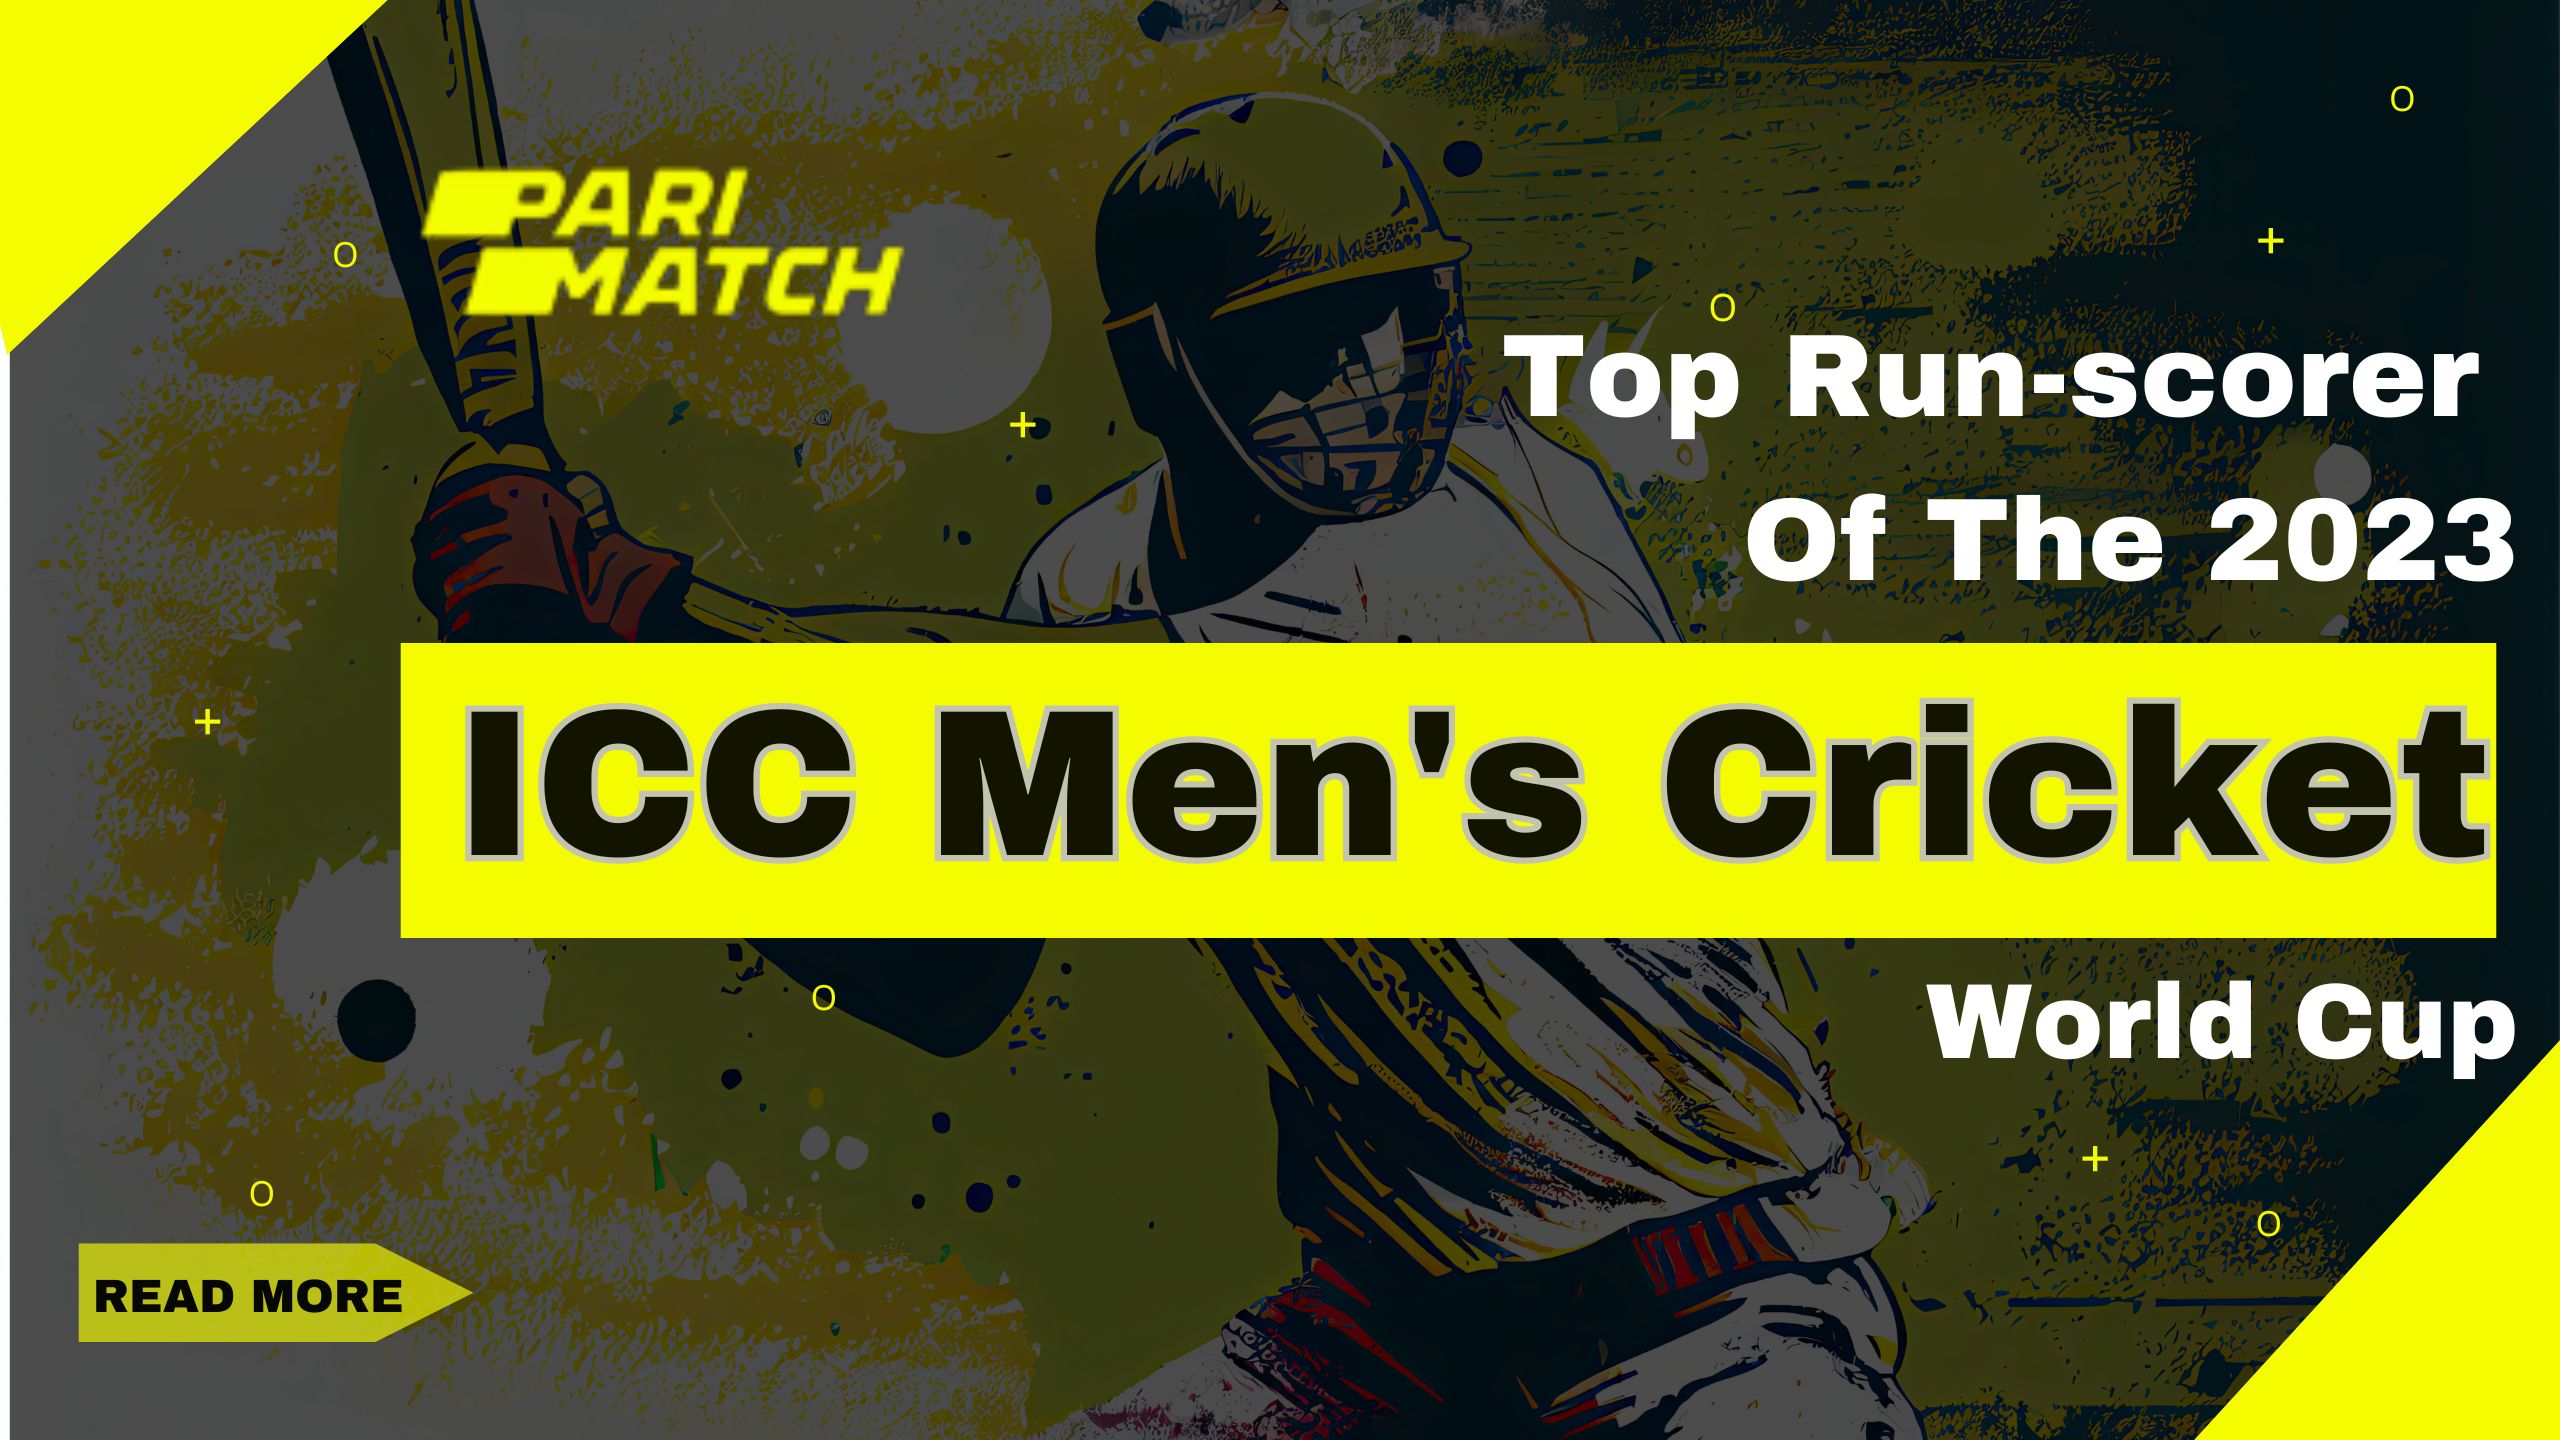 The Top Run-scorer Of The 2023 ICC Men's Cricket World Cup - Tipsearth.com